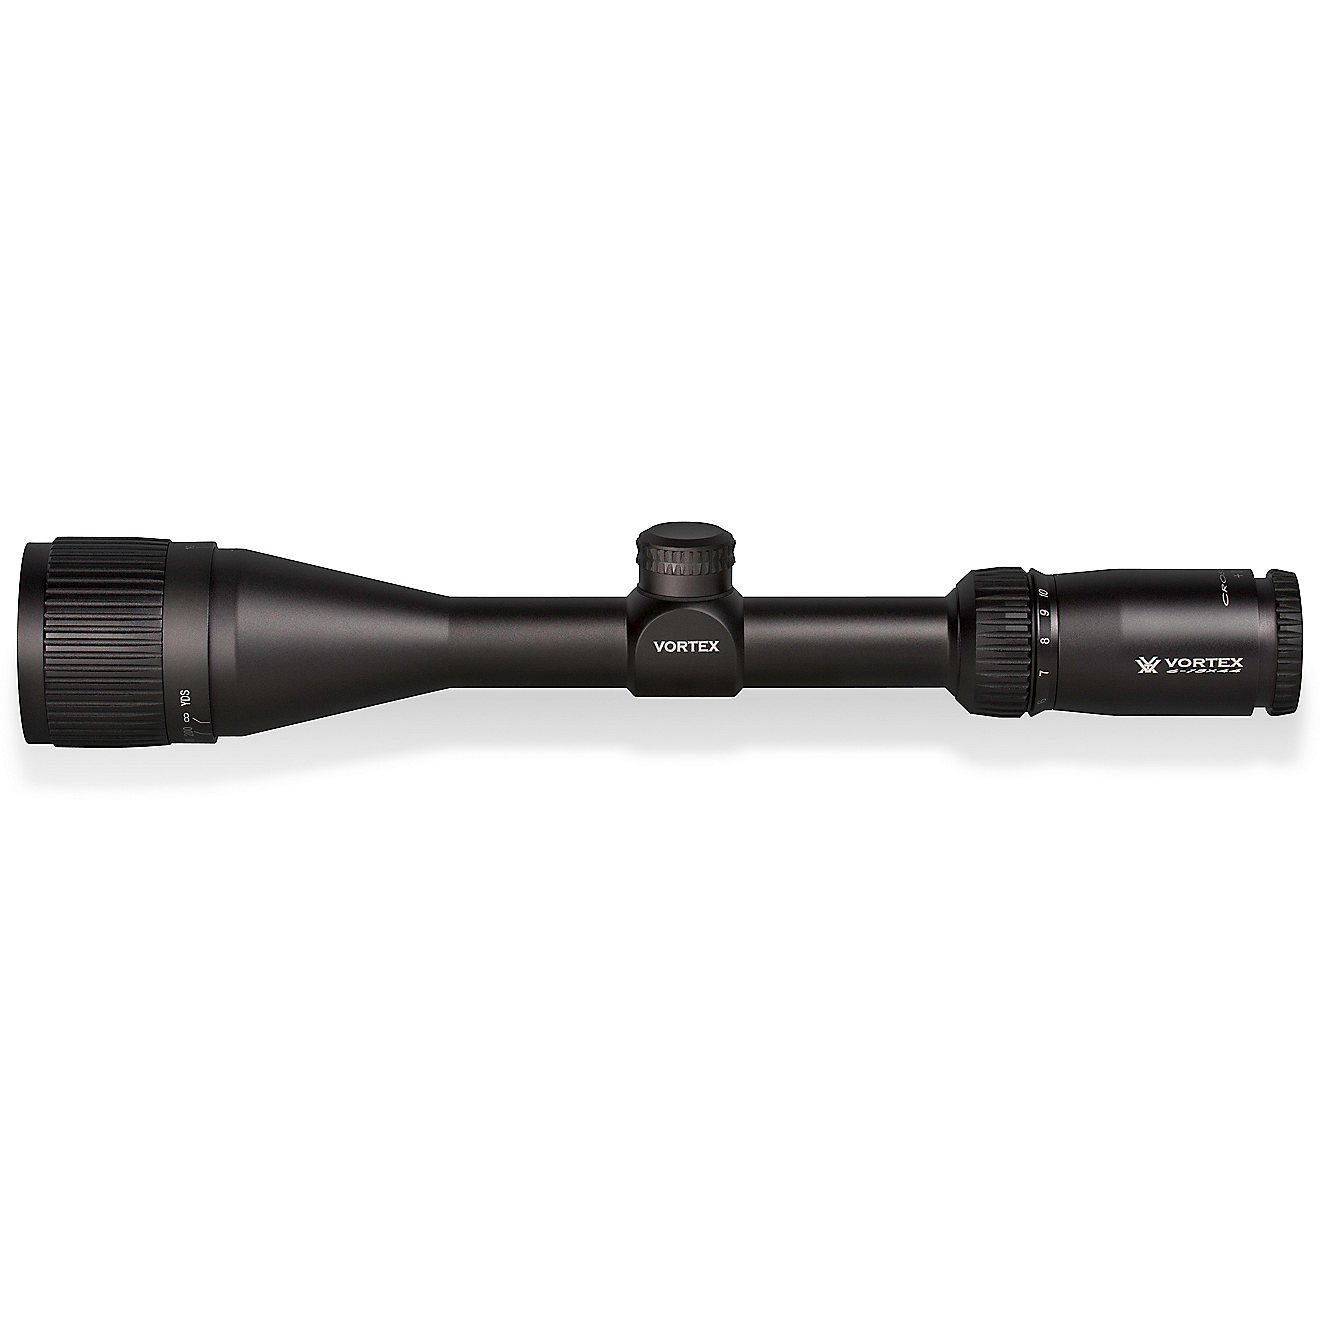 Vortex Crossfire II 6 - 18 x 44 AO BDC Scope with Sunshade                                                                       - view number 3